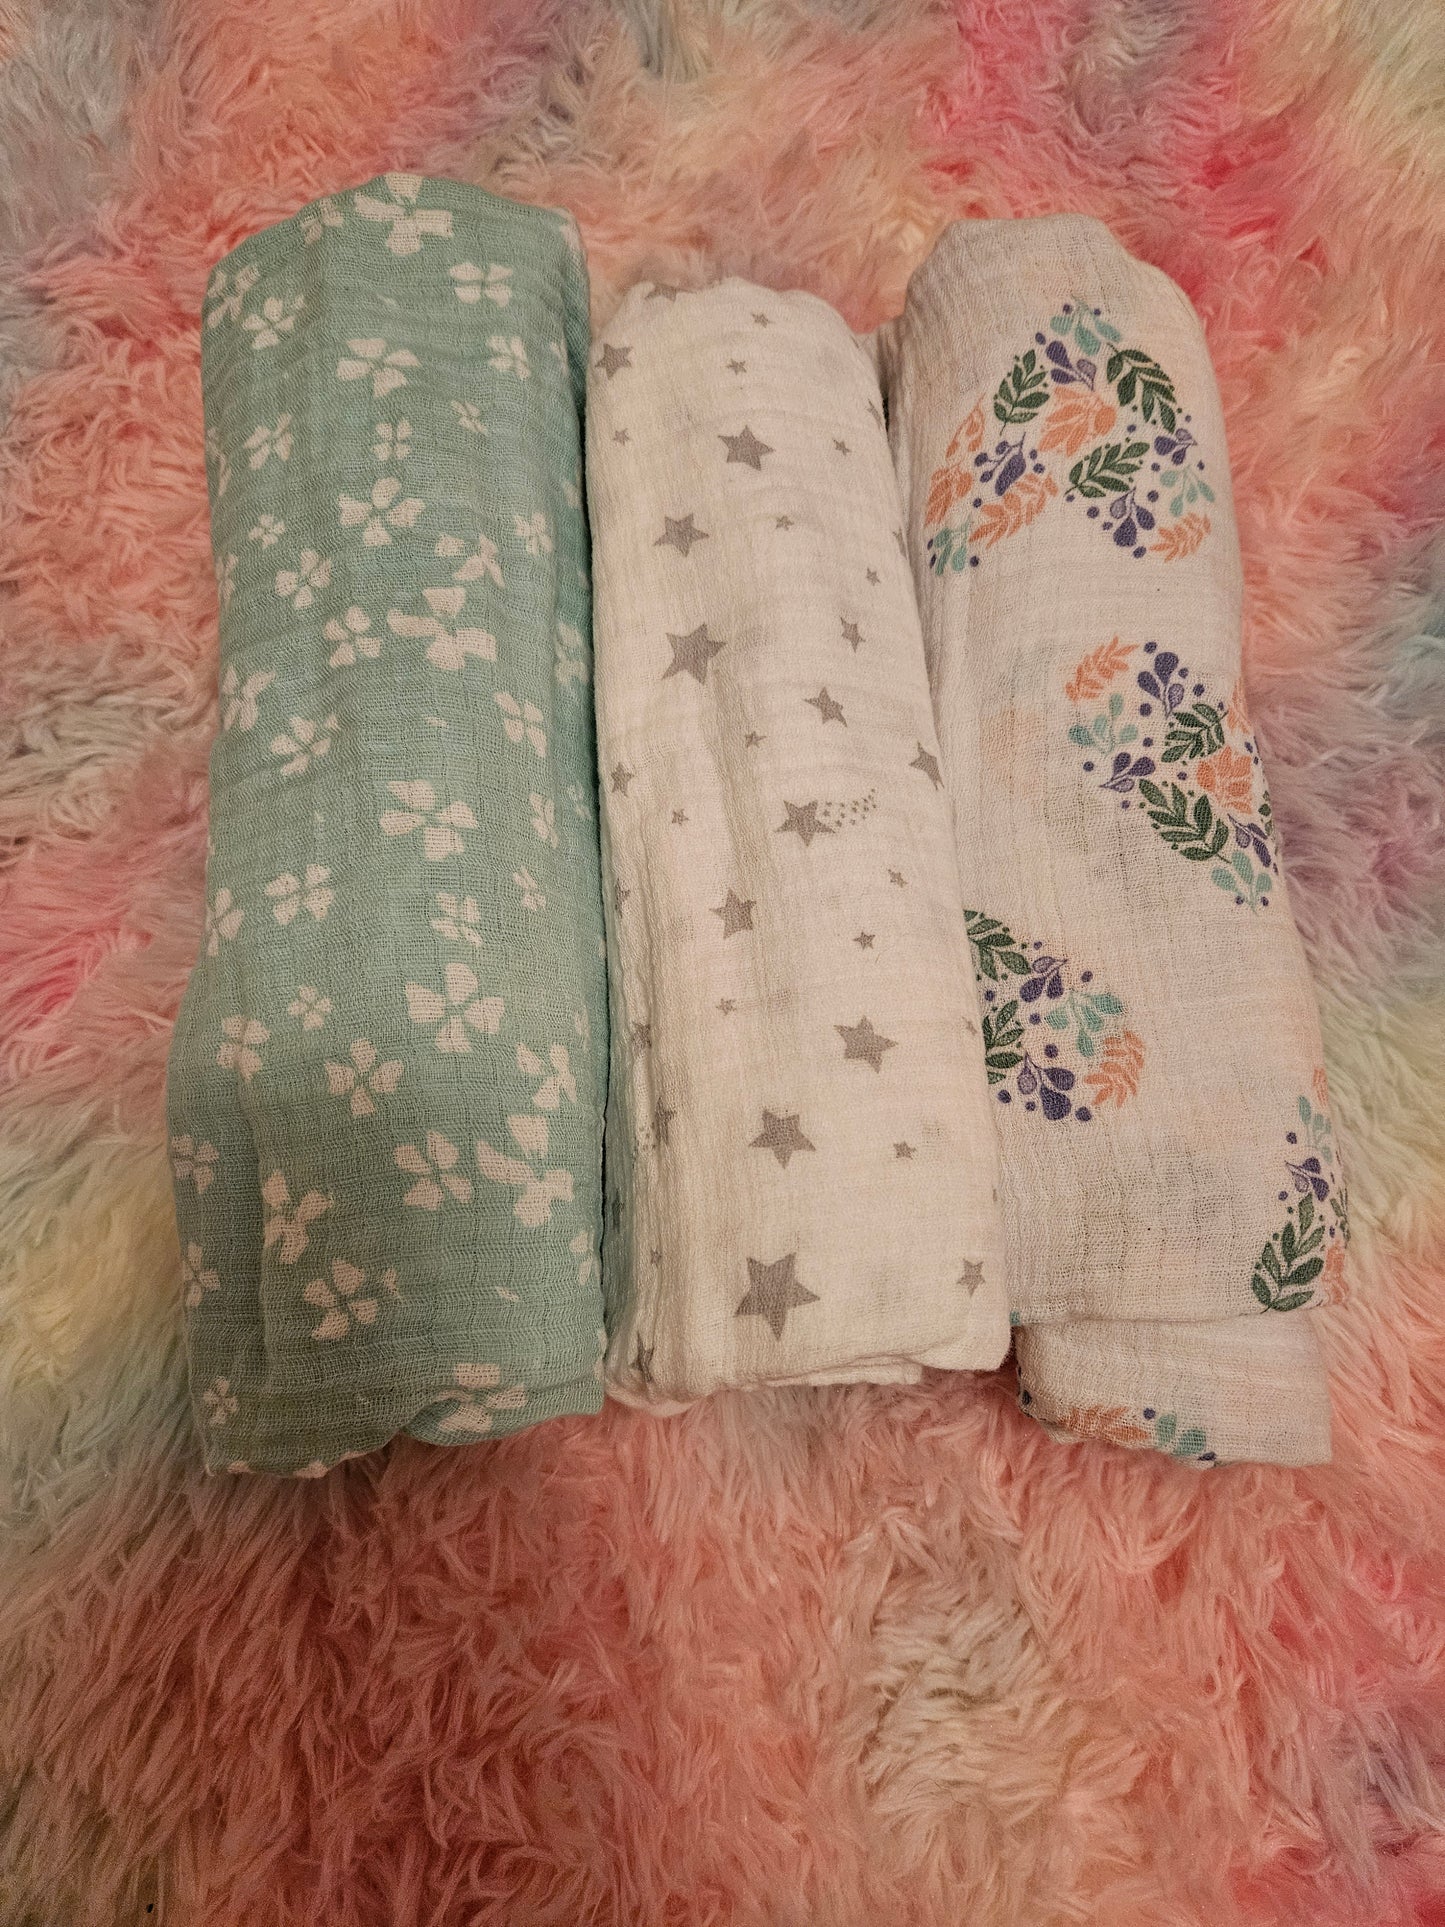 Muslin swaddle blanket bundle x3. blue and pink floral theme